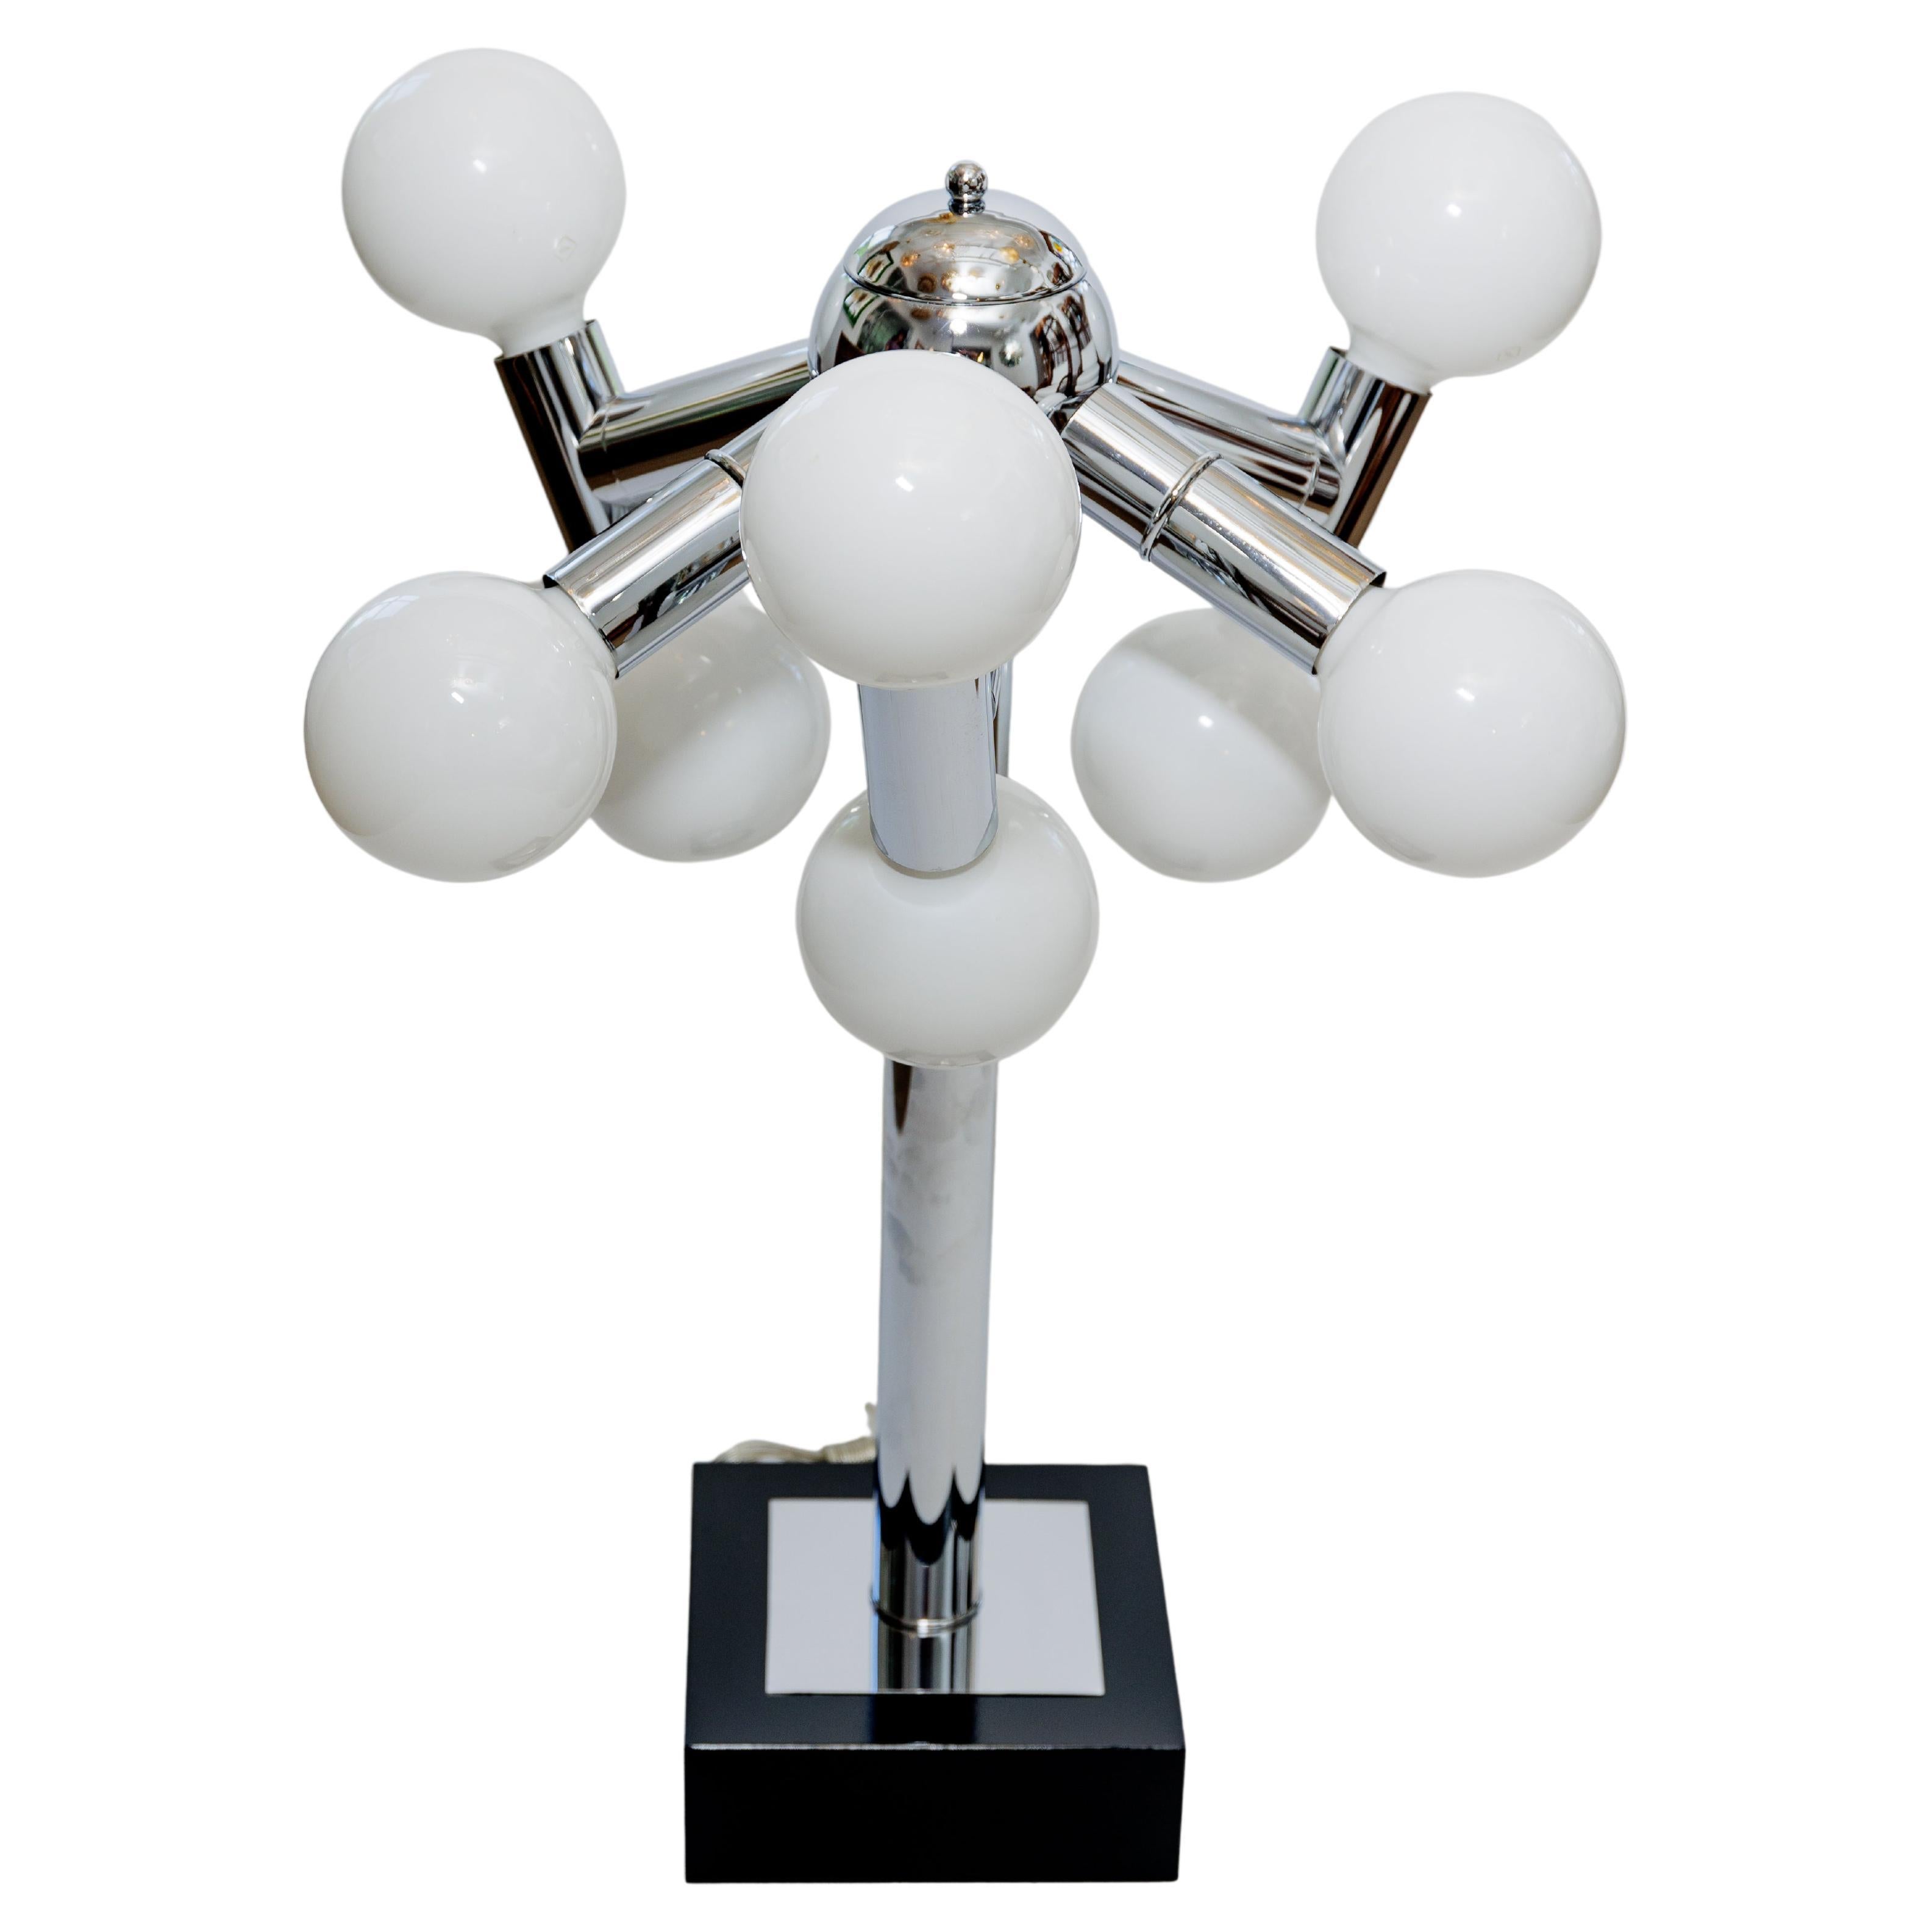 A pair of chrome black base table lamps, each with nine globes of light.